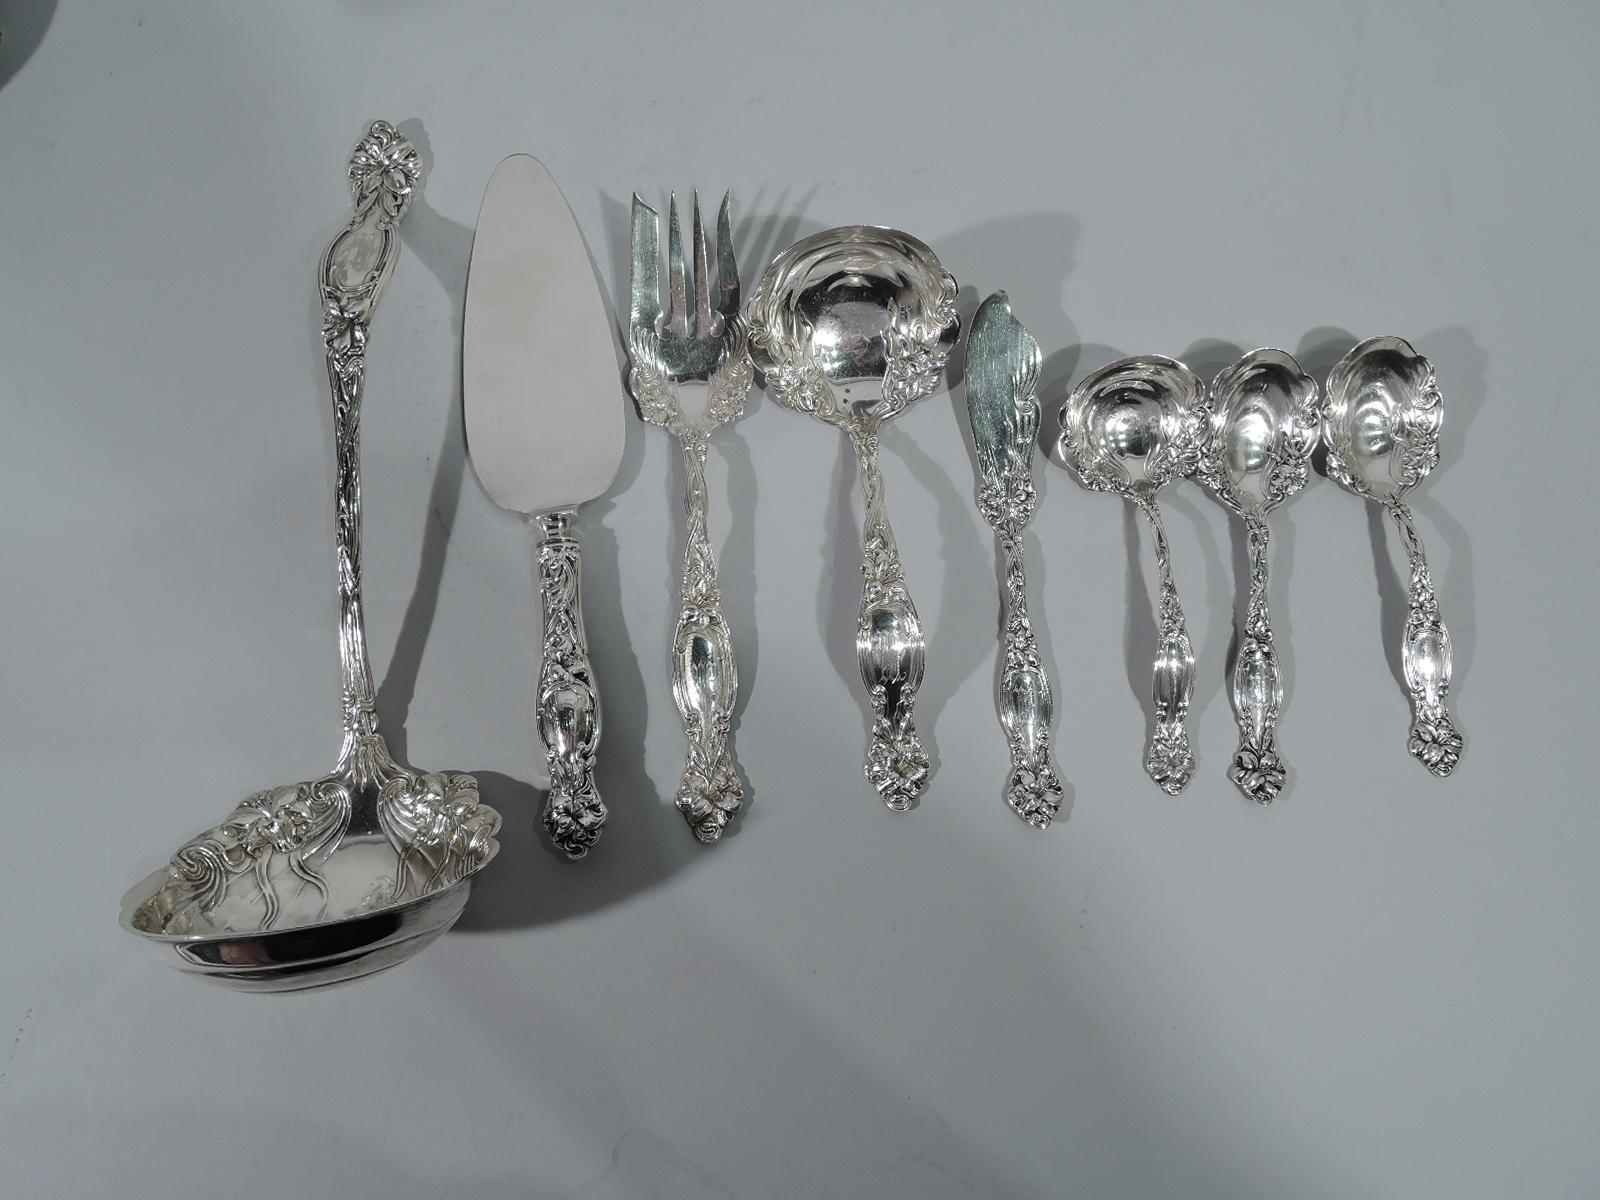 American Antique International Frontenac Dinner Set for 12 with 110 Pieces